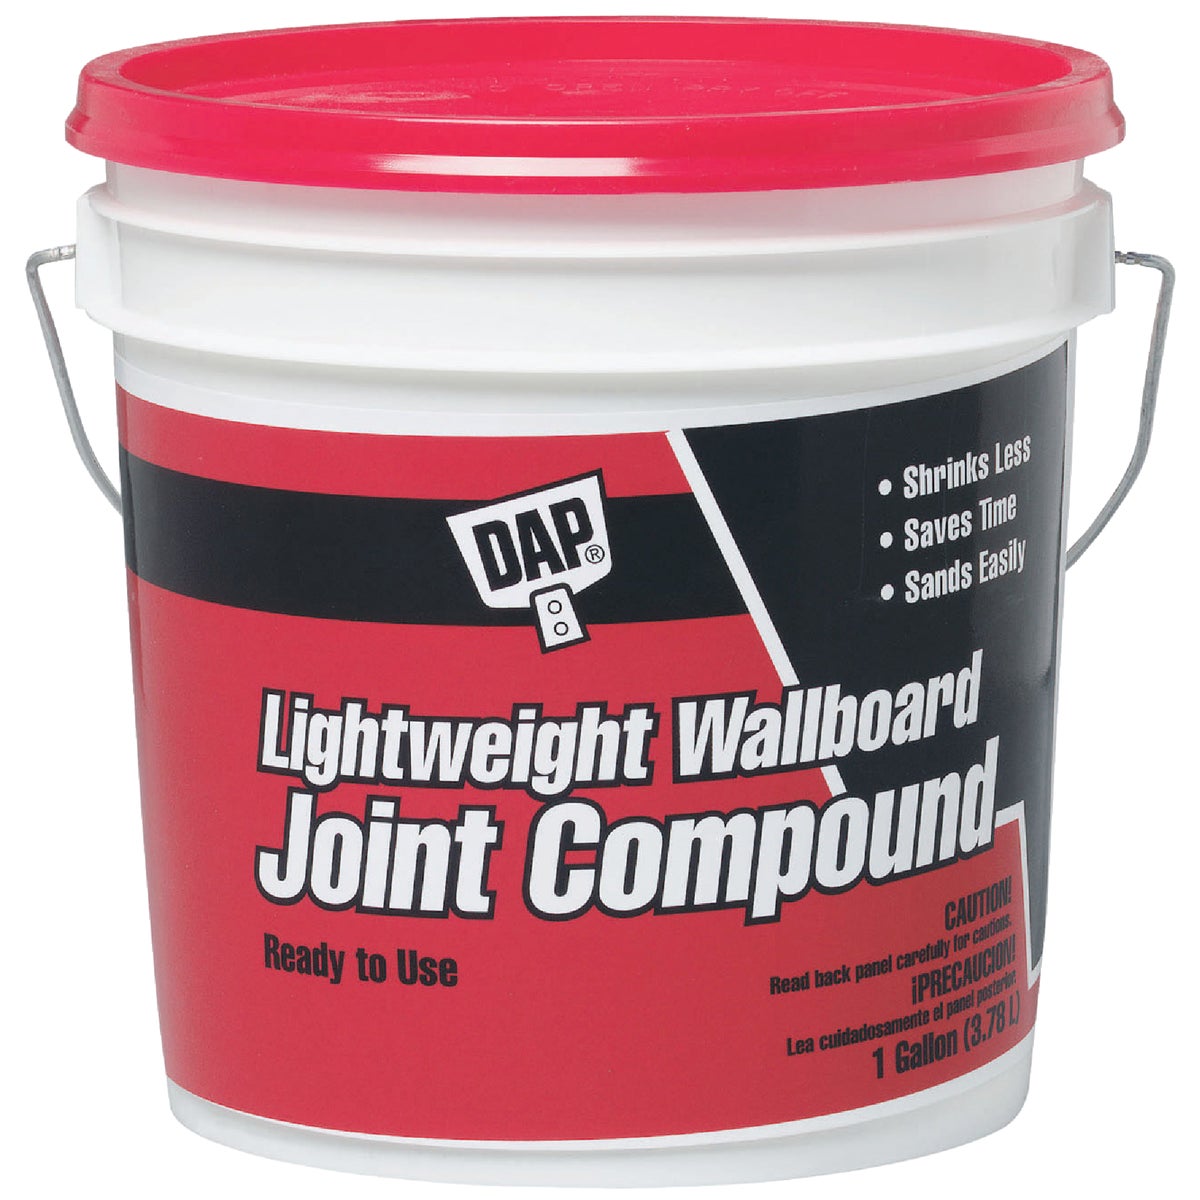 Item 268291, Ready-to-use compound finishes gypsum panel joints with less work, easy 